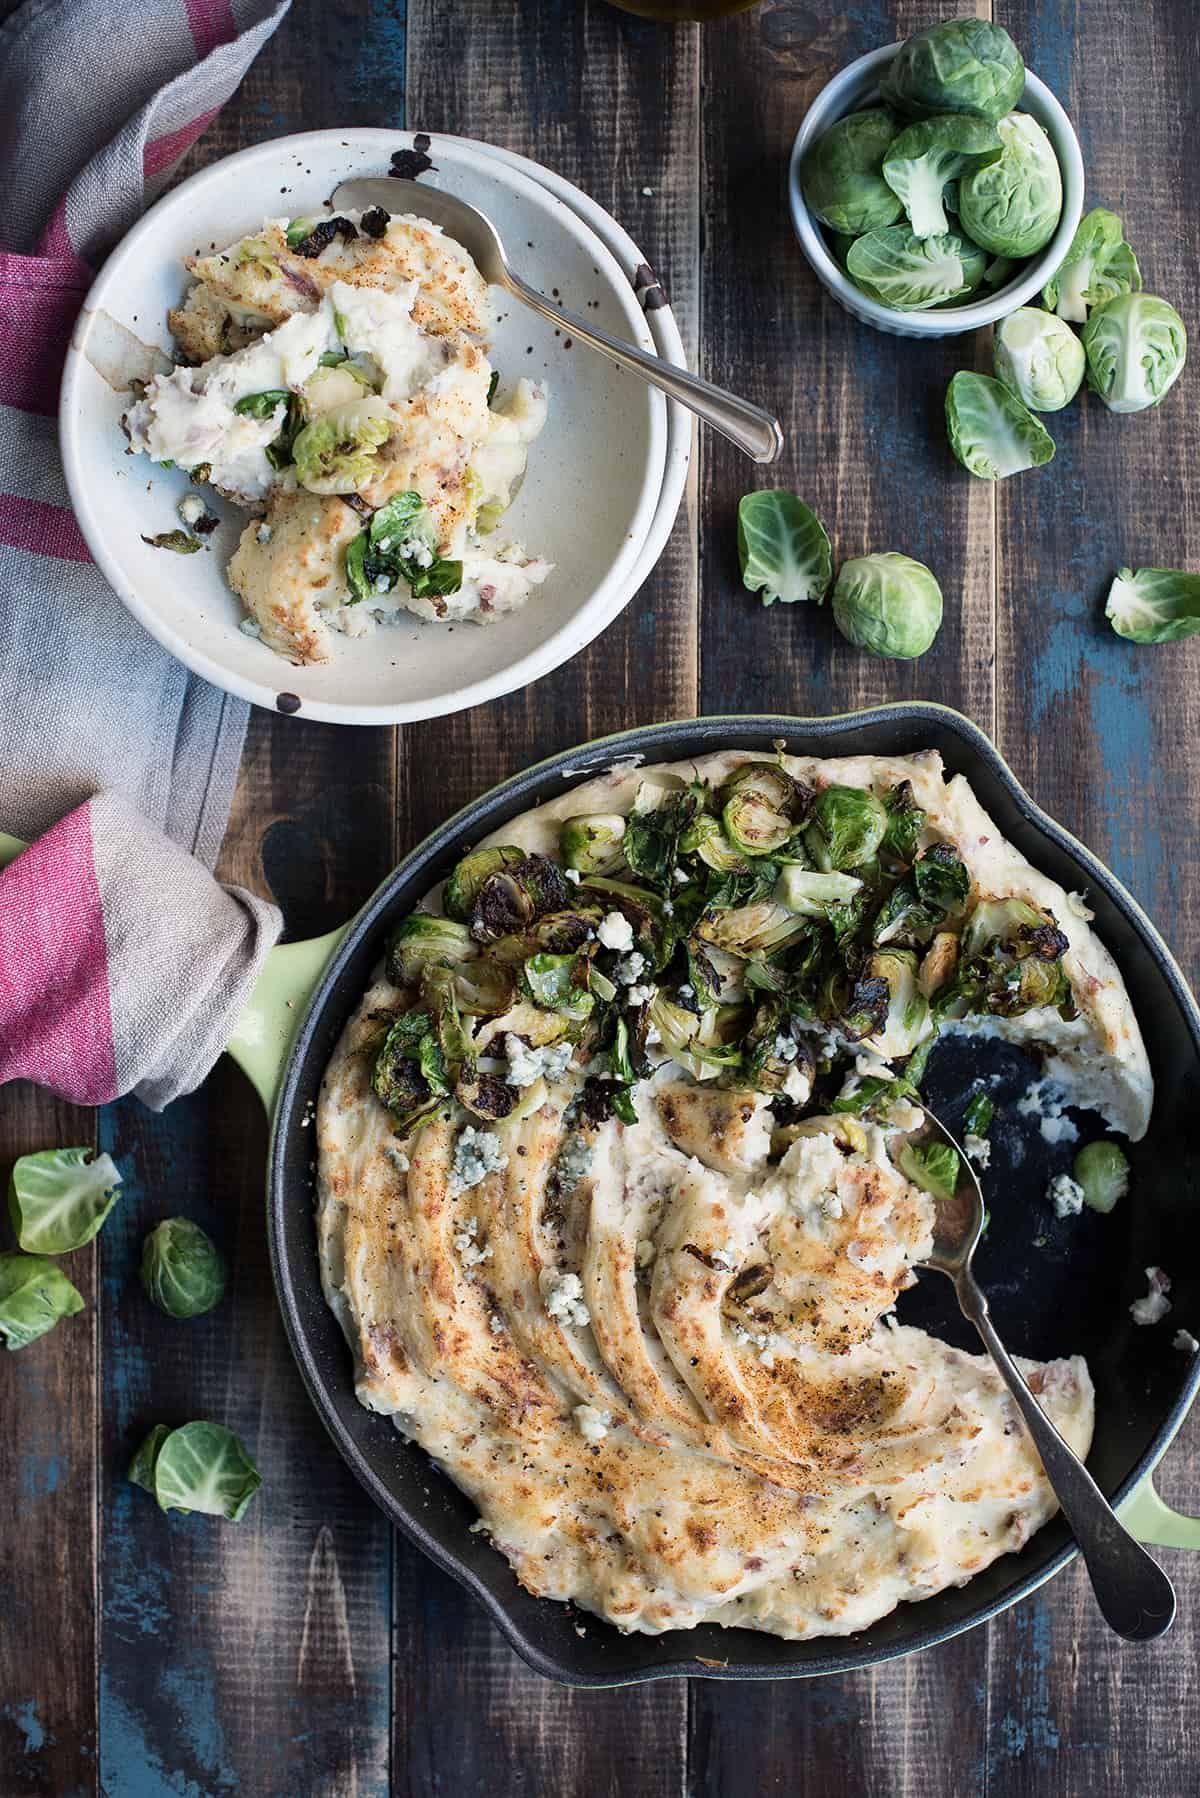 Broiled Mashed Potatoes with Roasted Sprouts in cast iron skillet, some eaten, with spoon